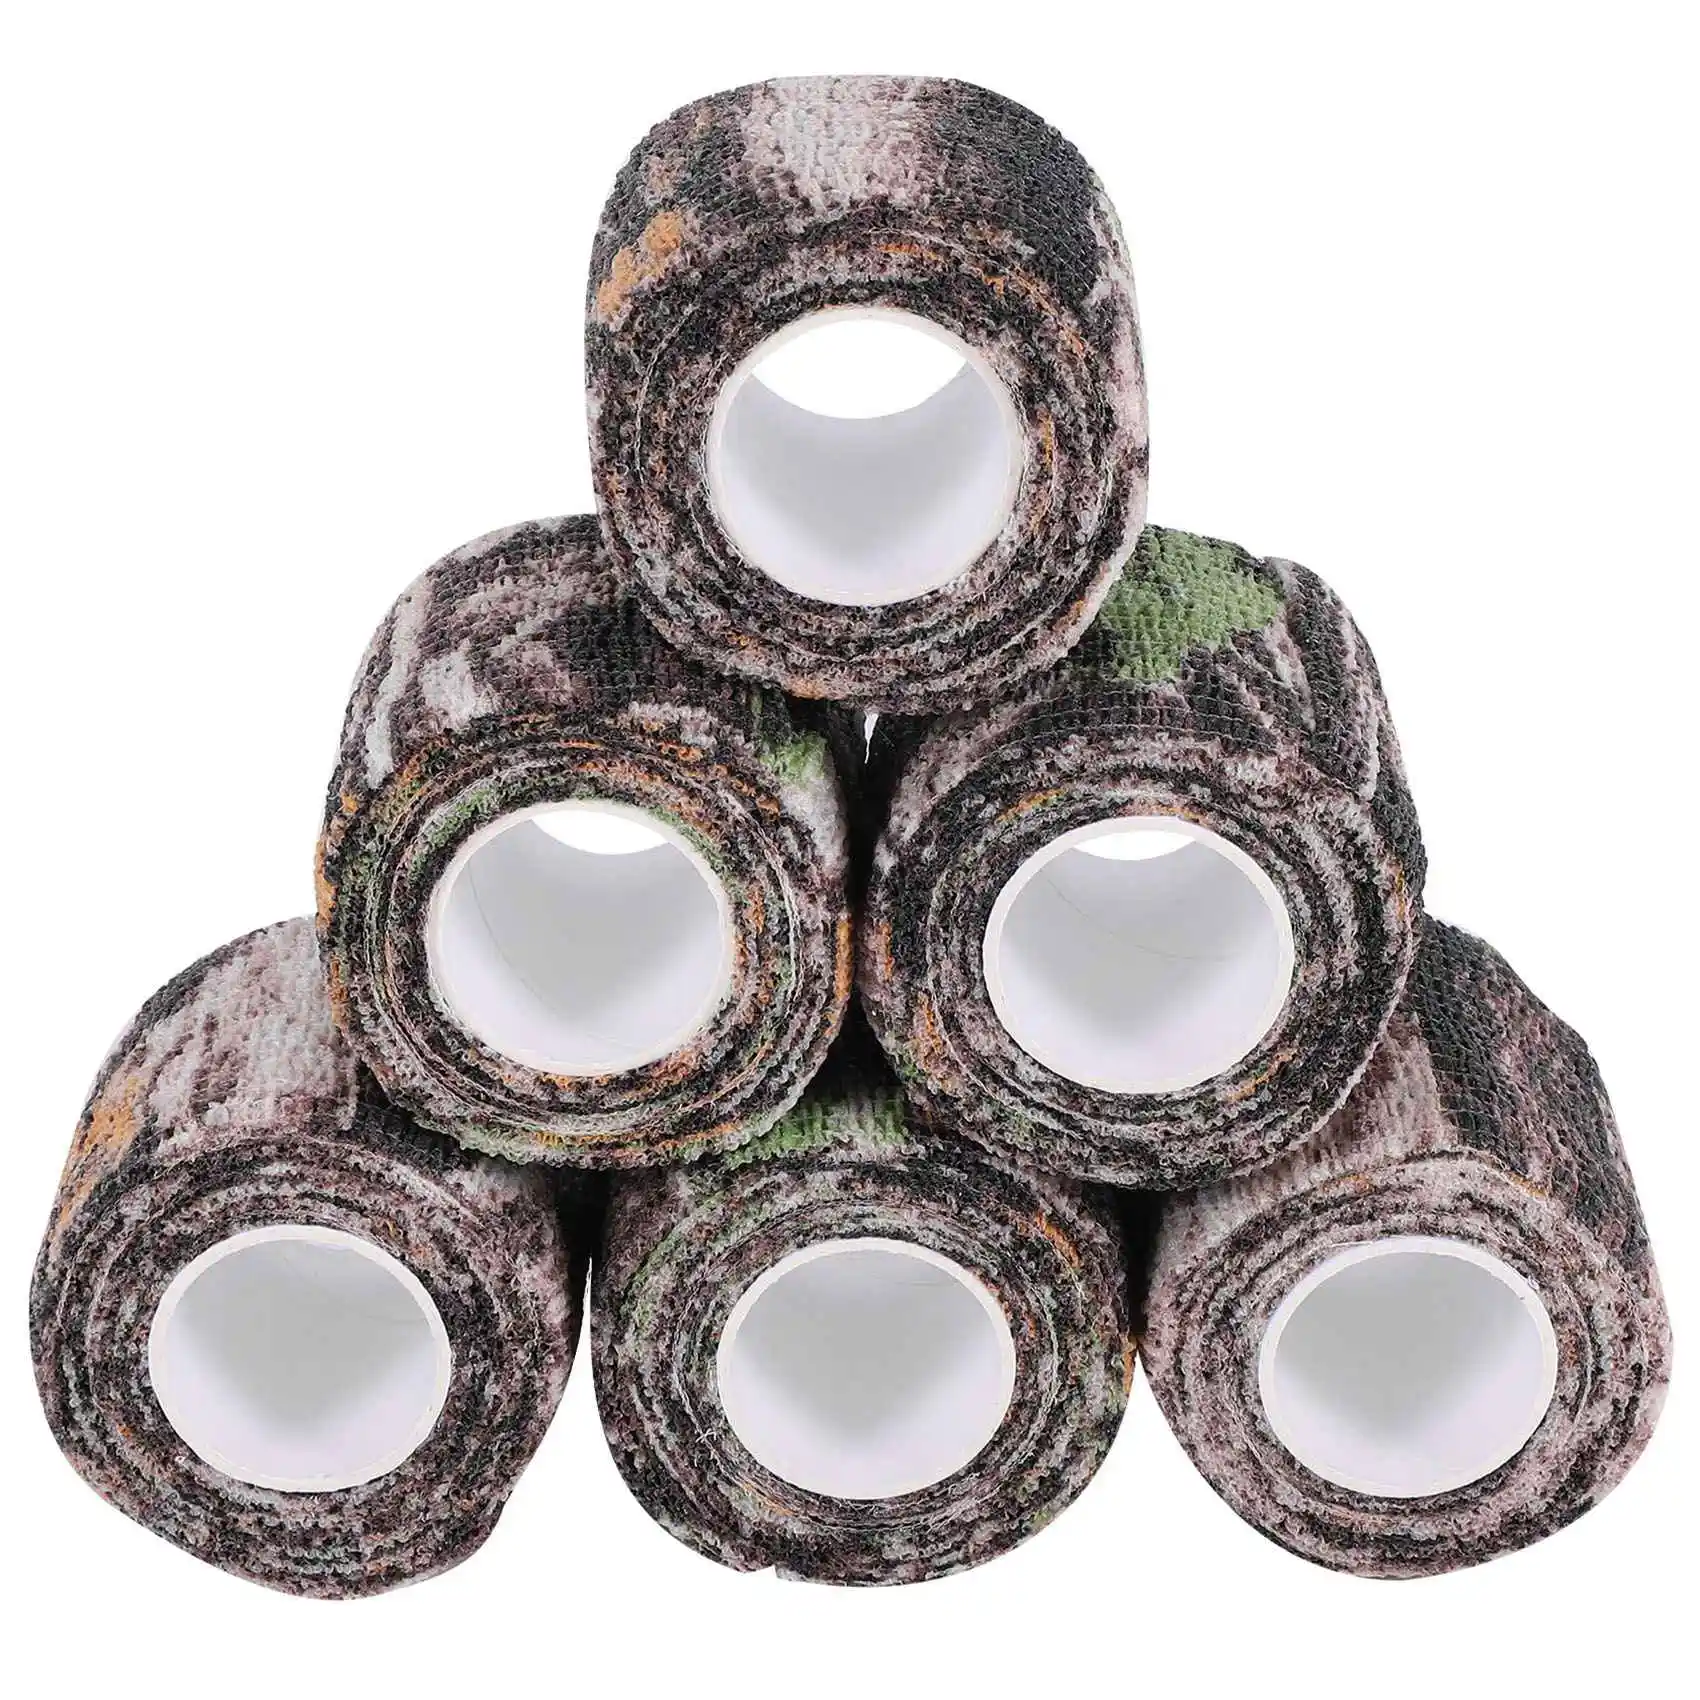 

6 Roll Camouflage Tape Cling Scope Wrap Camo Stretch Bandage Self-Adhesive Tape for Camping Hunting Bike Telescope